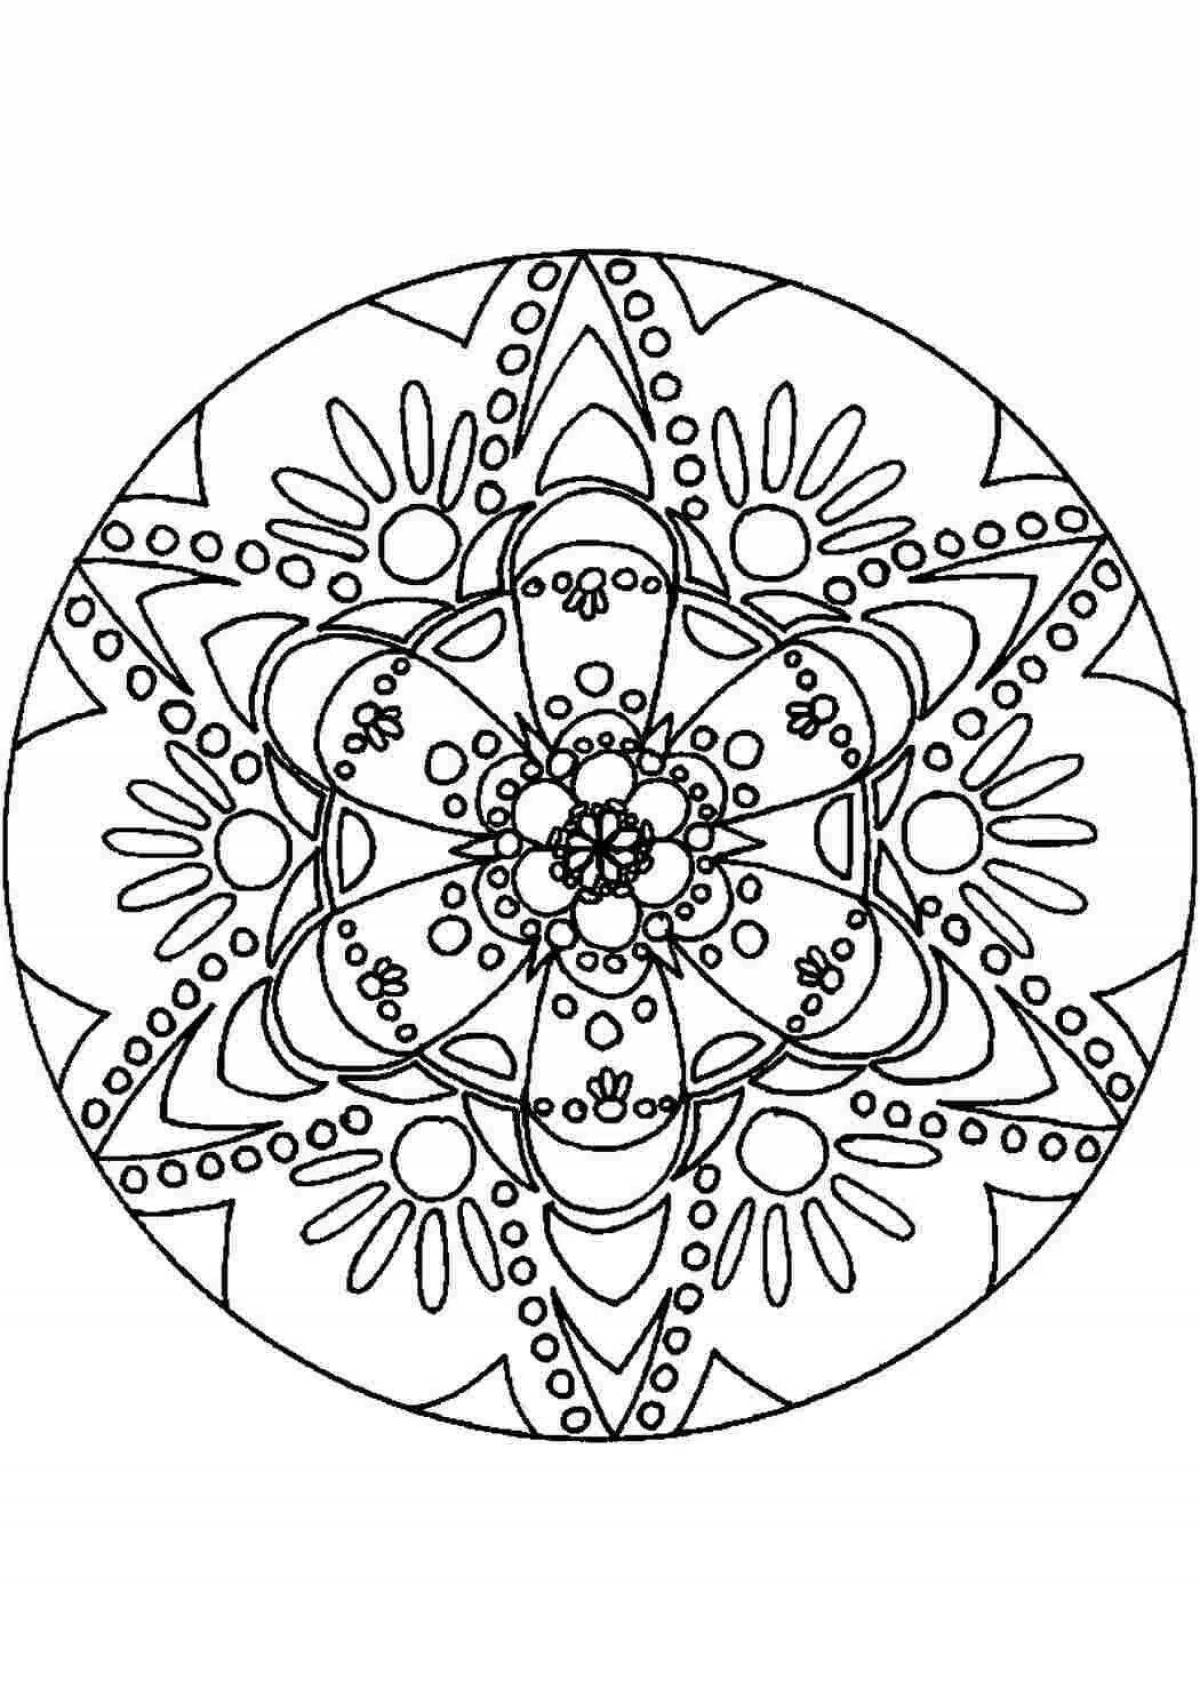 Mantra coloring pages for kids